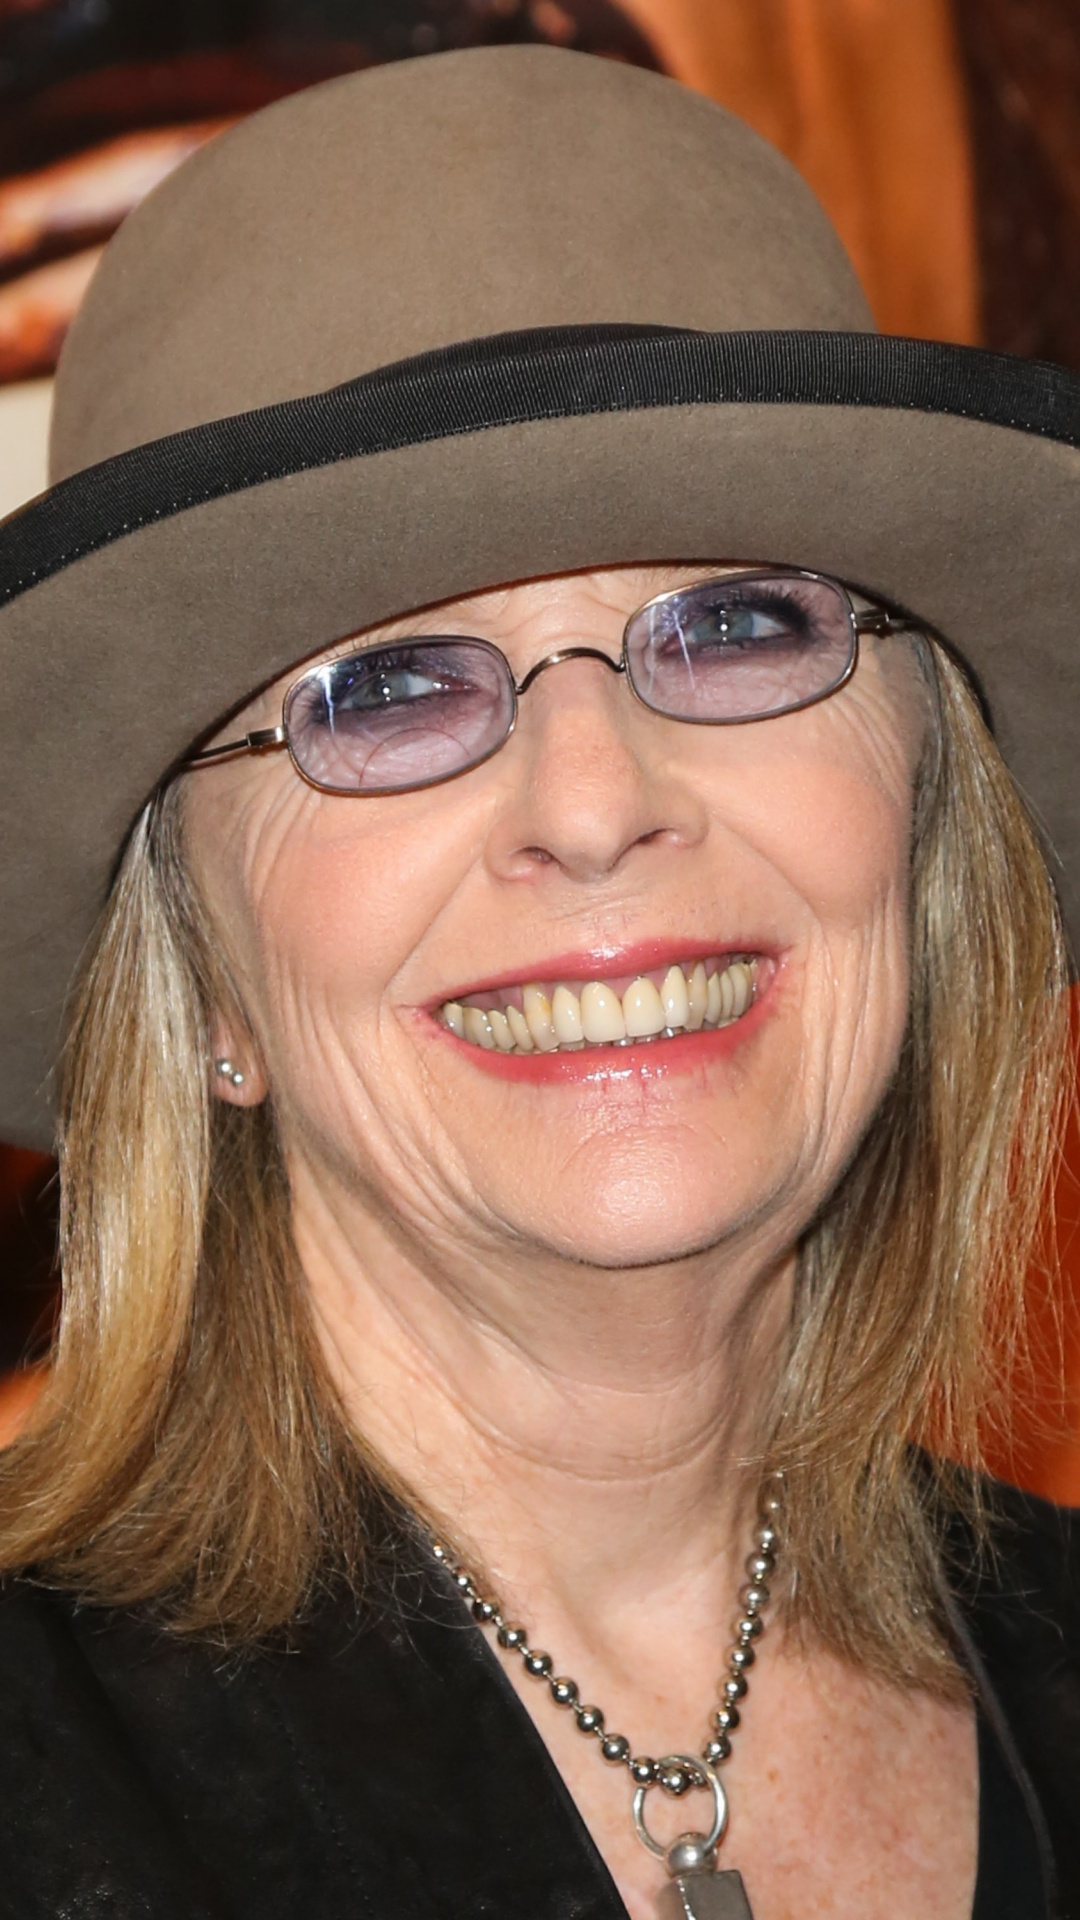 Diane Keaton, HD wallpapers, Celebrity portraits, High-quality images, 1080x1920 Full HD Handy